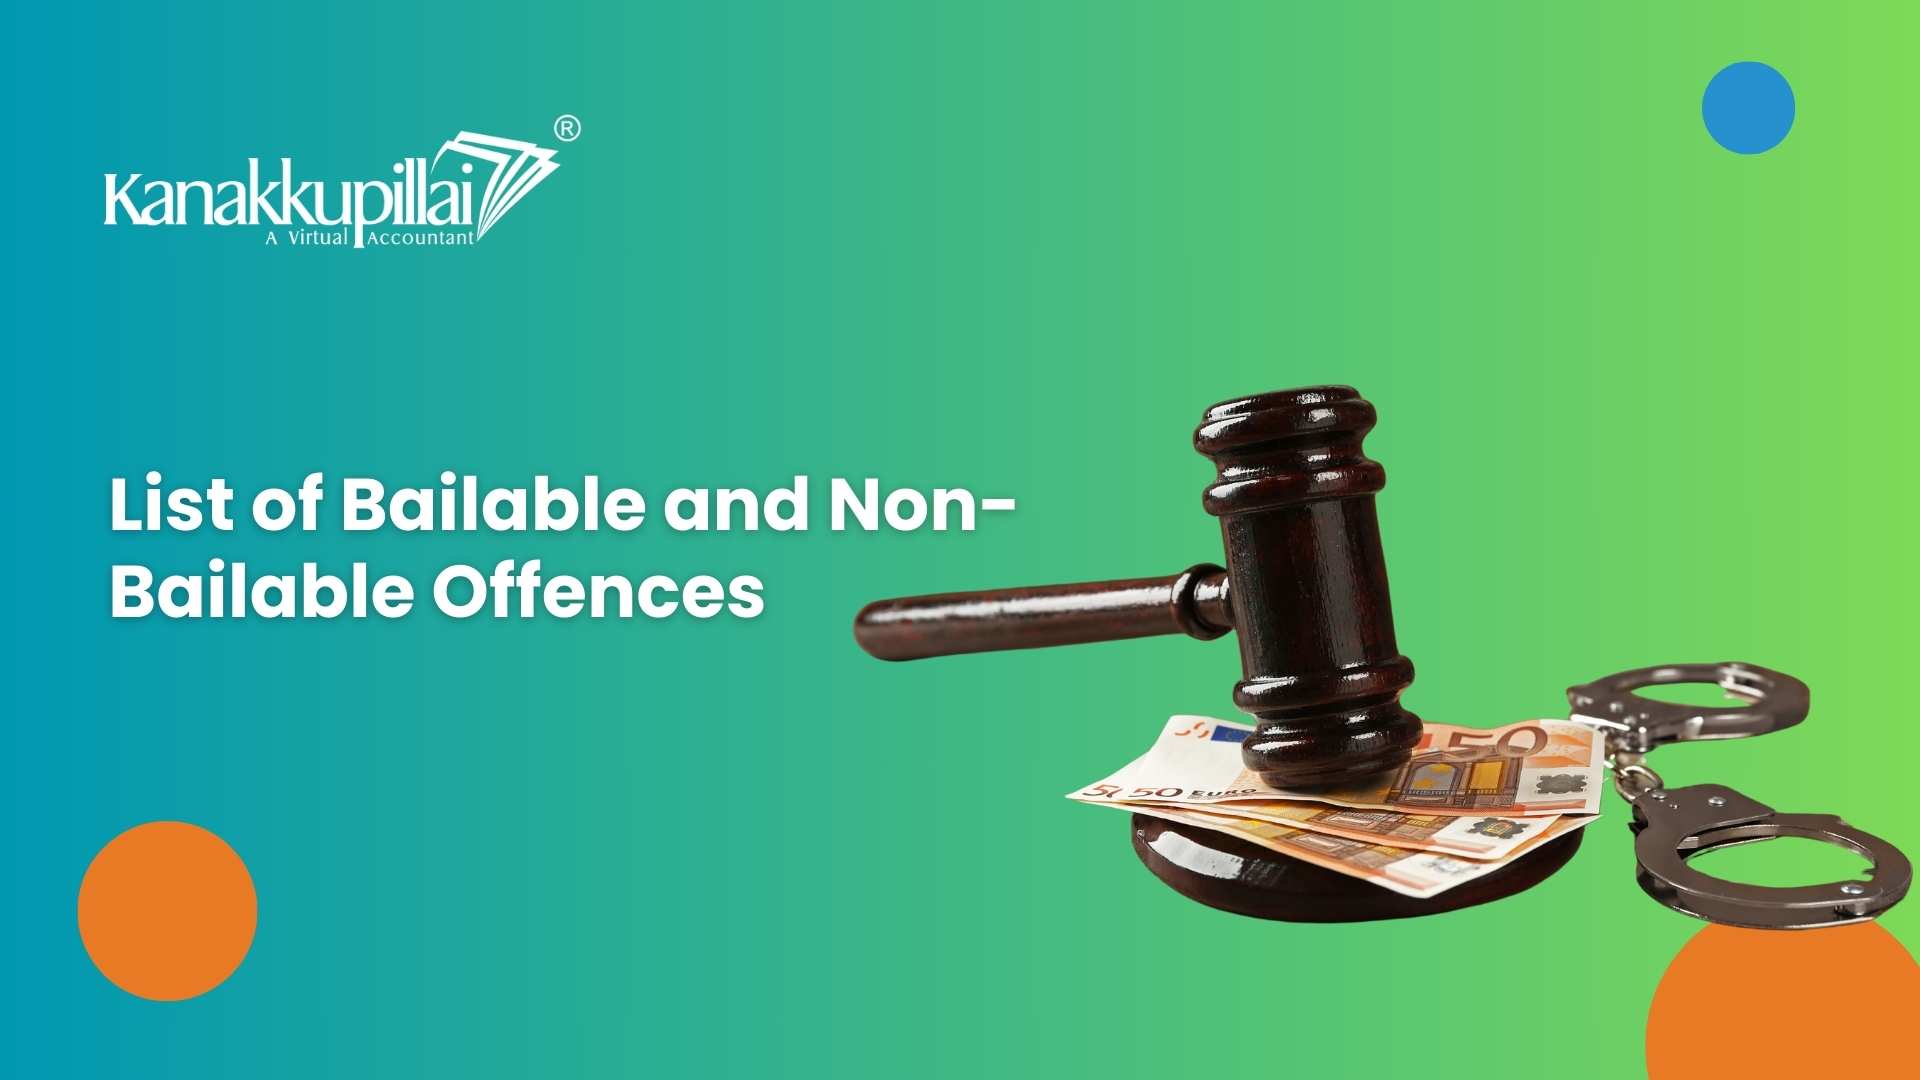 You are currently viewing List of Bailable and Non-Bailable Offences